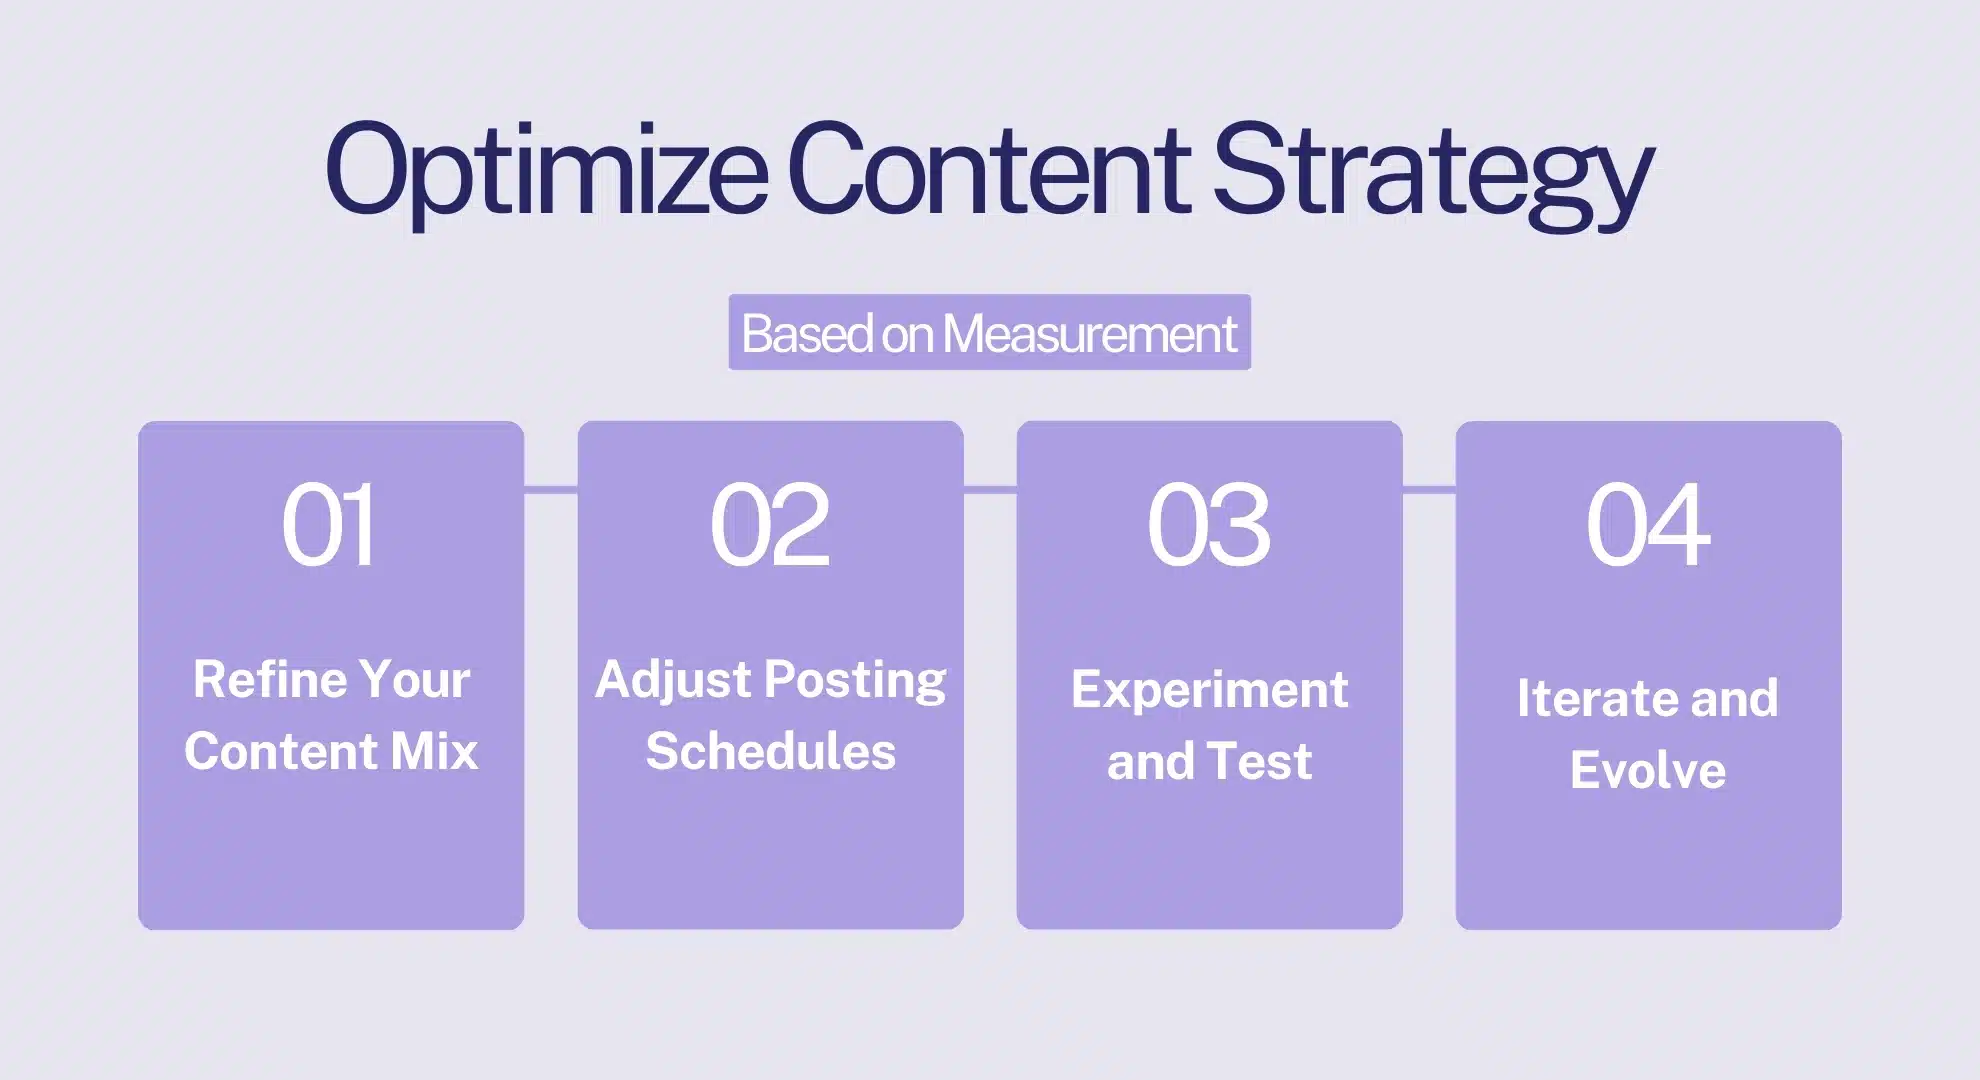 Optimize Content Strategy Based on Measurement